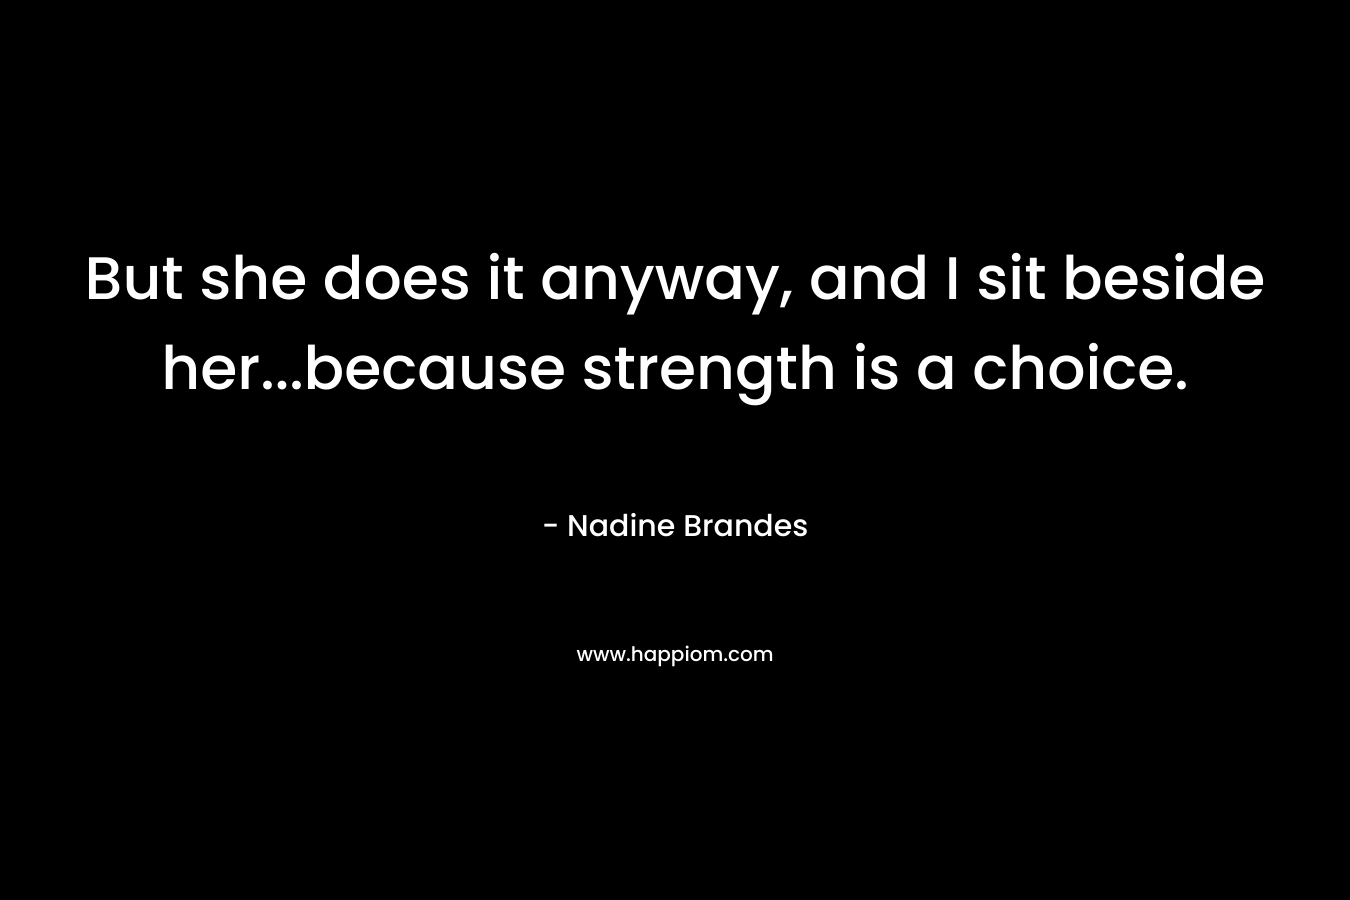 But she does it anyway, and I sit beside her...because strength is a choice.